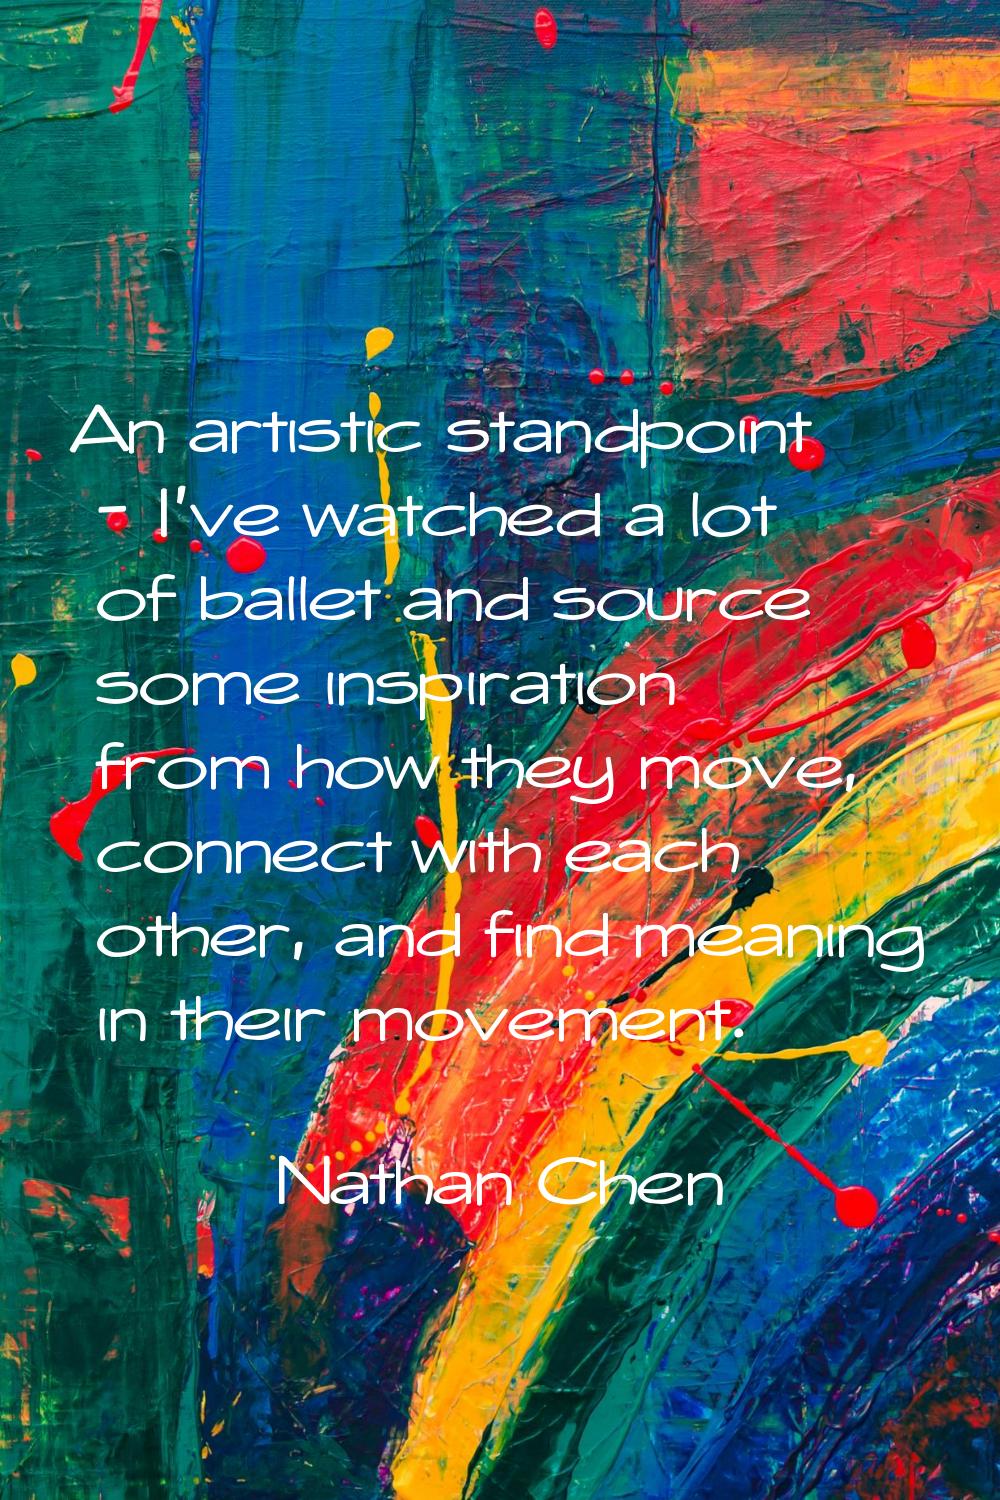 An artistic standpoint - I've watched a lot of ballet and source some inspiration from how they mov